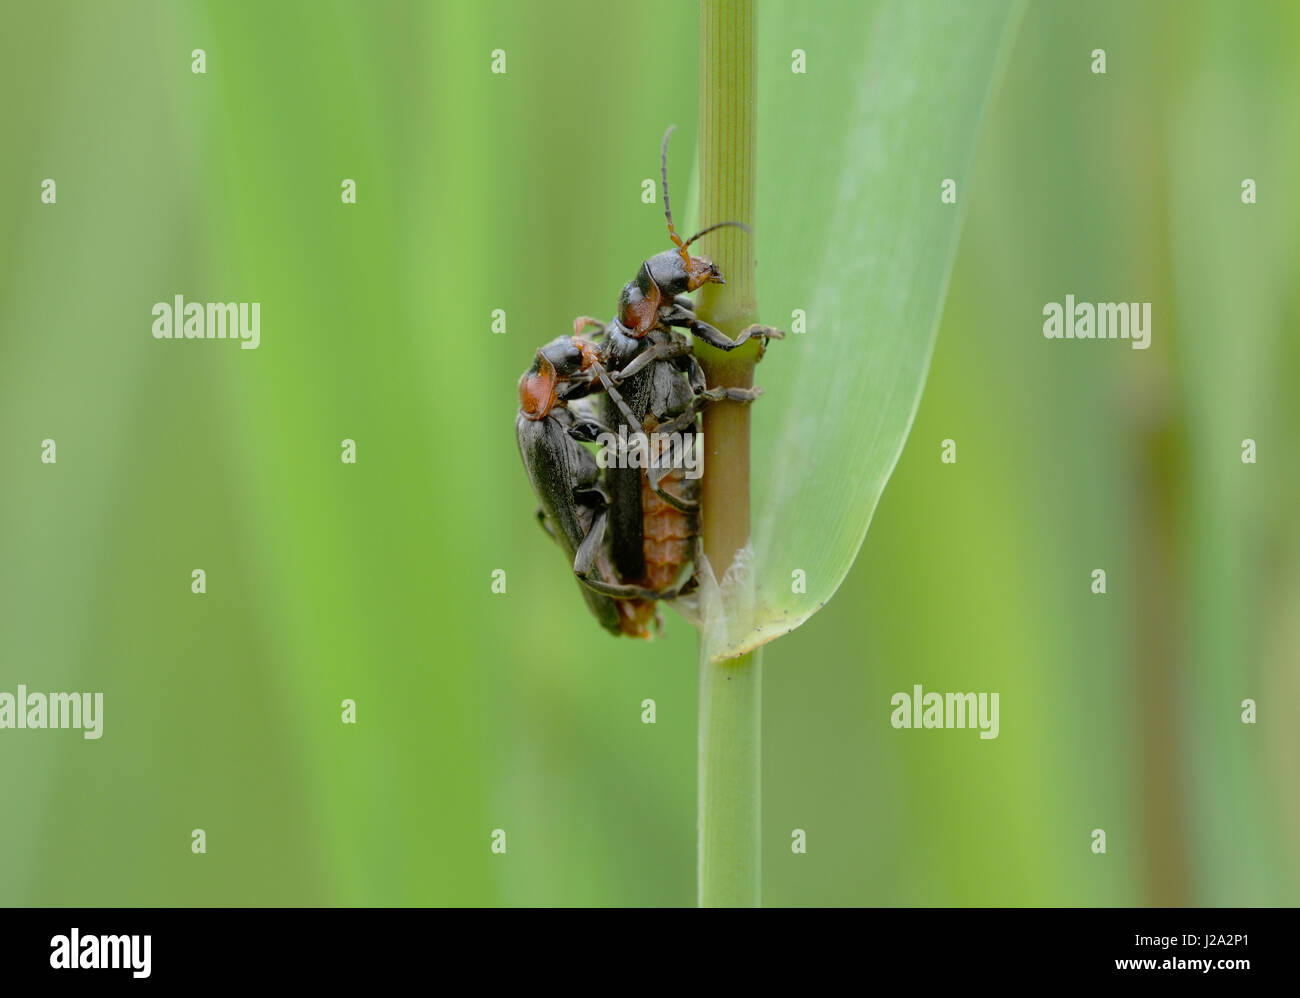 Black soldier beetles mating Stock Photo - Alamy